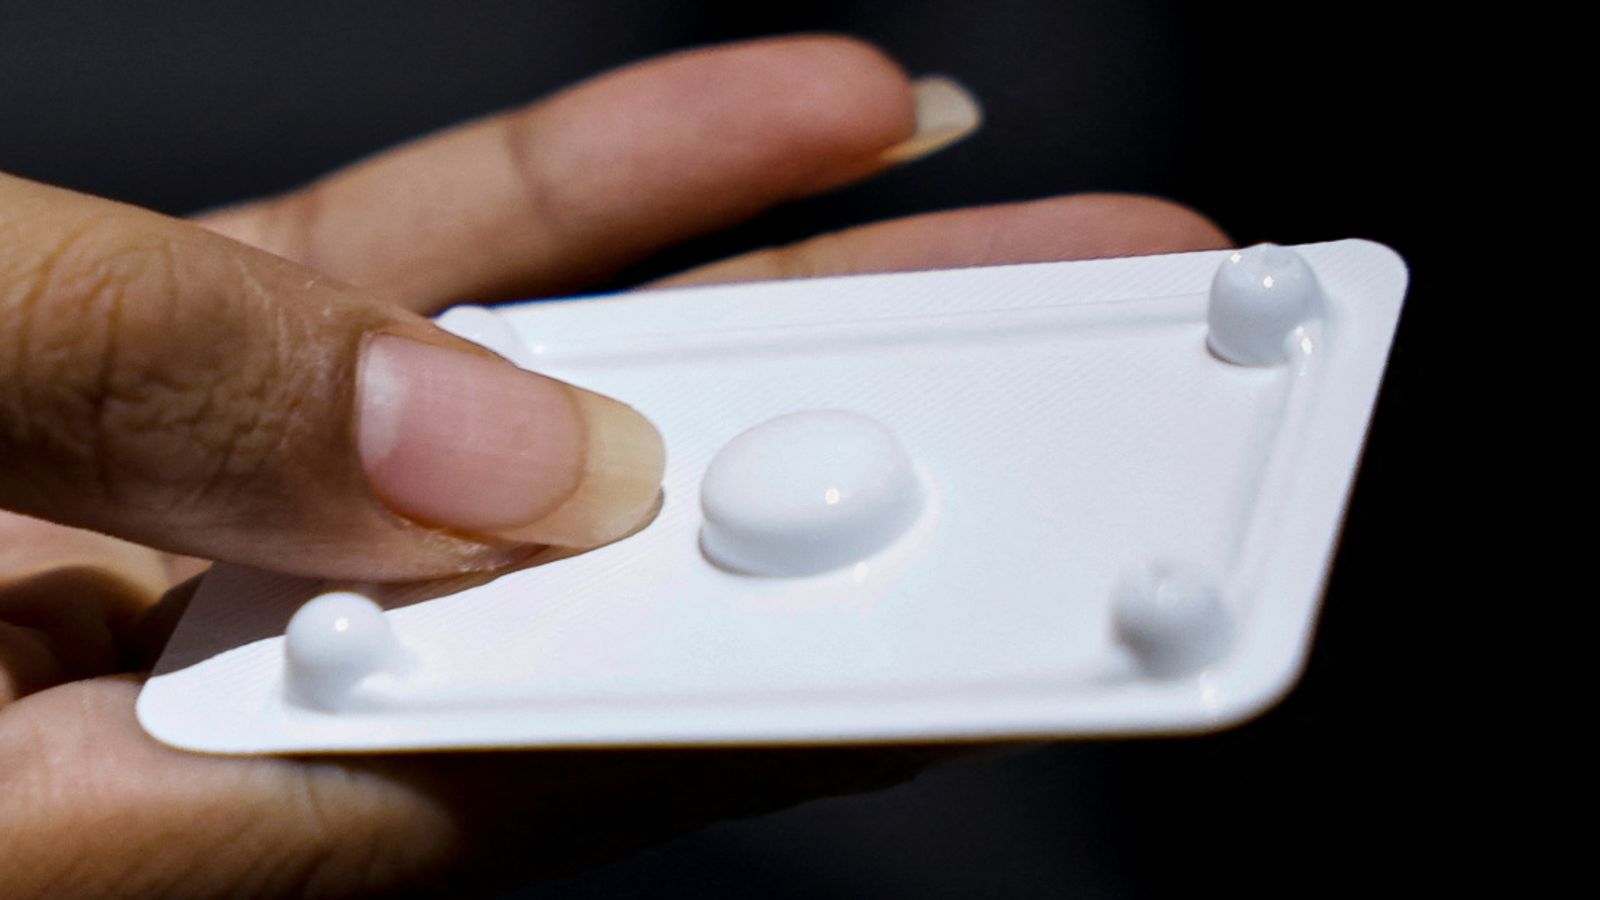 US Supreme Court preserves women's access to abortion pill mifepristone at centre of legal fight